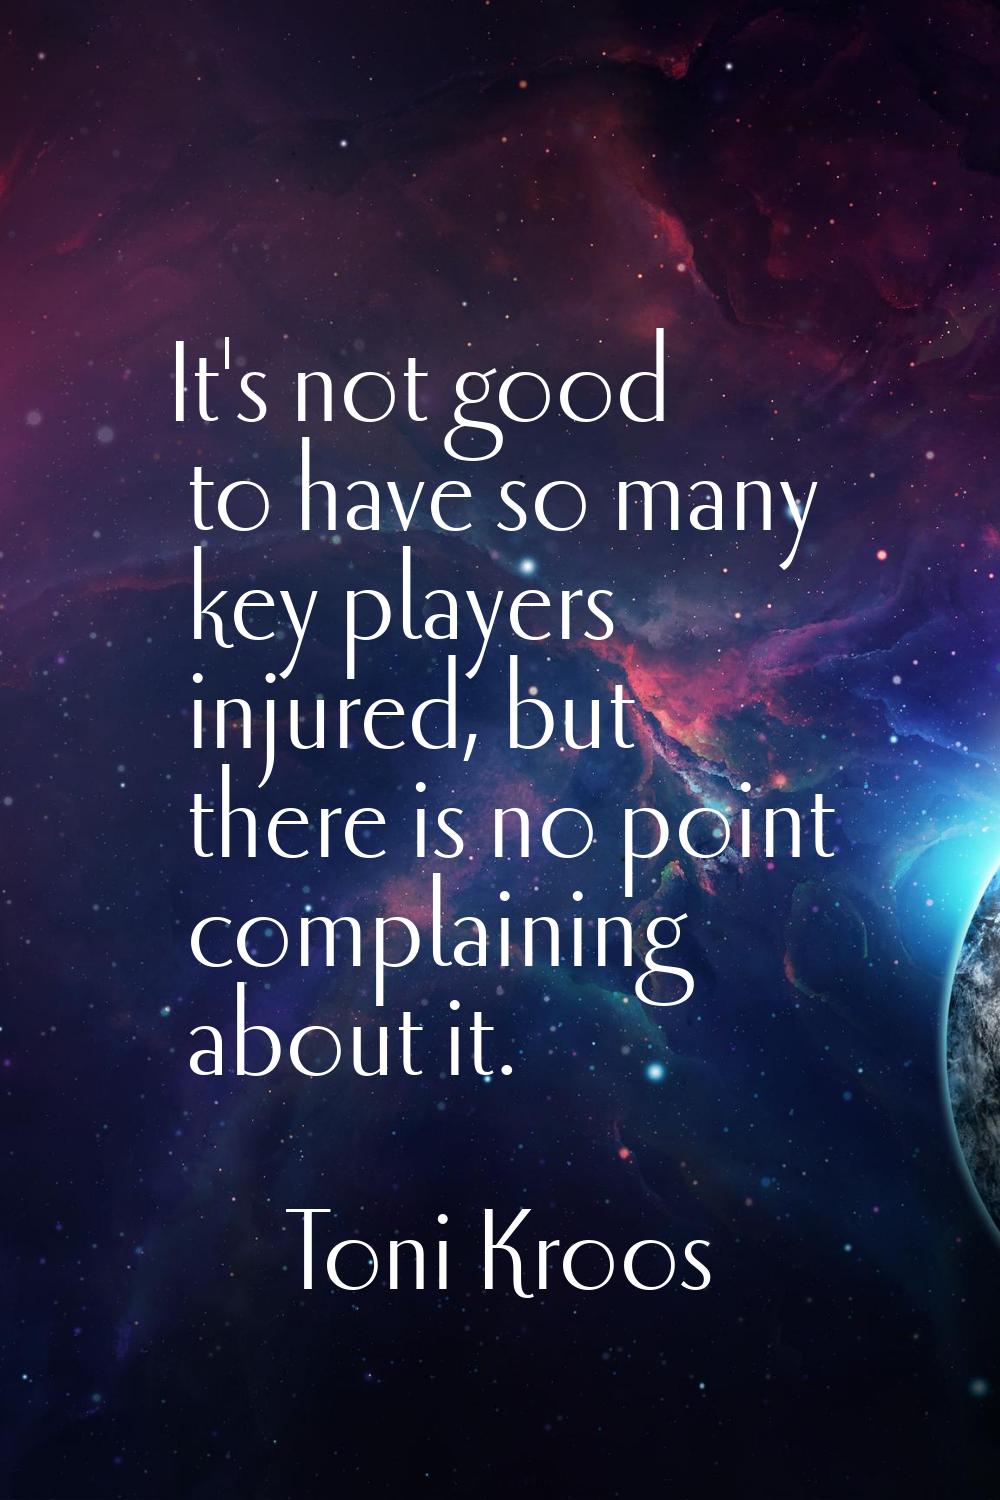 It's not good to have so many key players injured, but there is no point complaining about it.